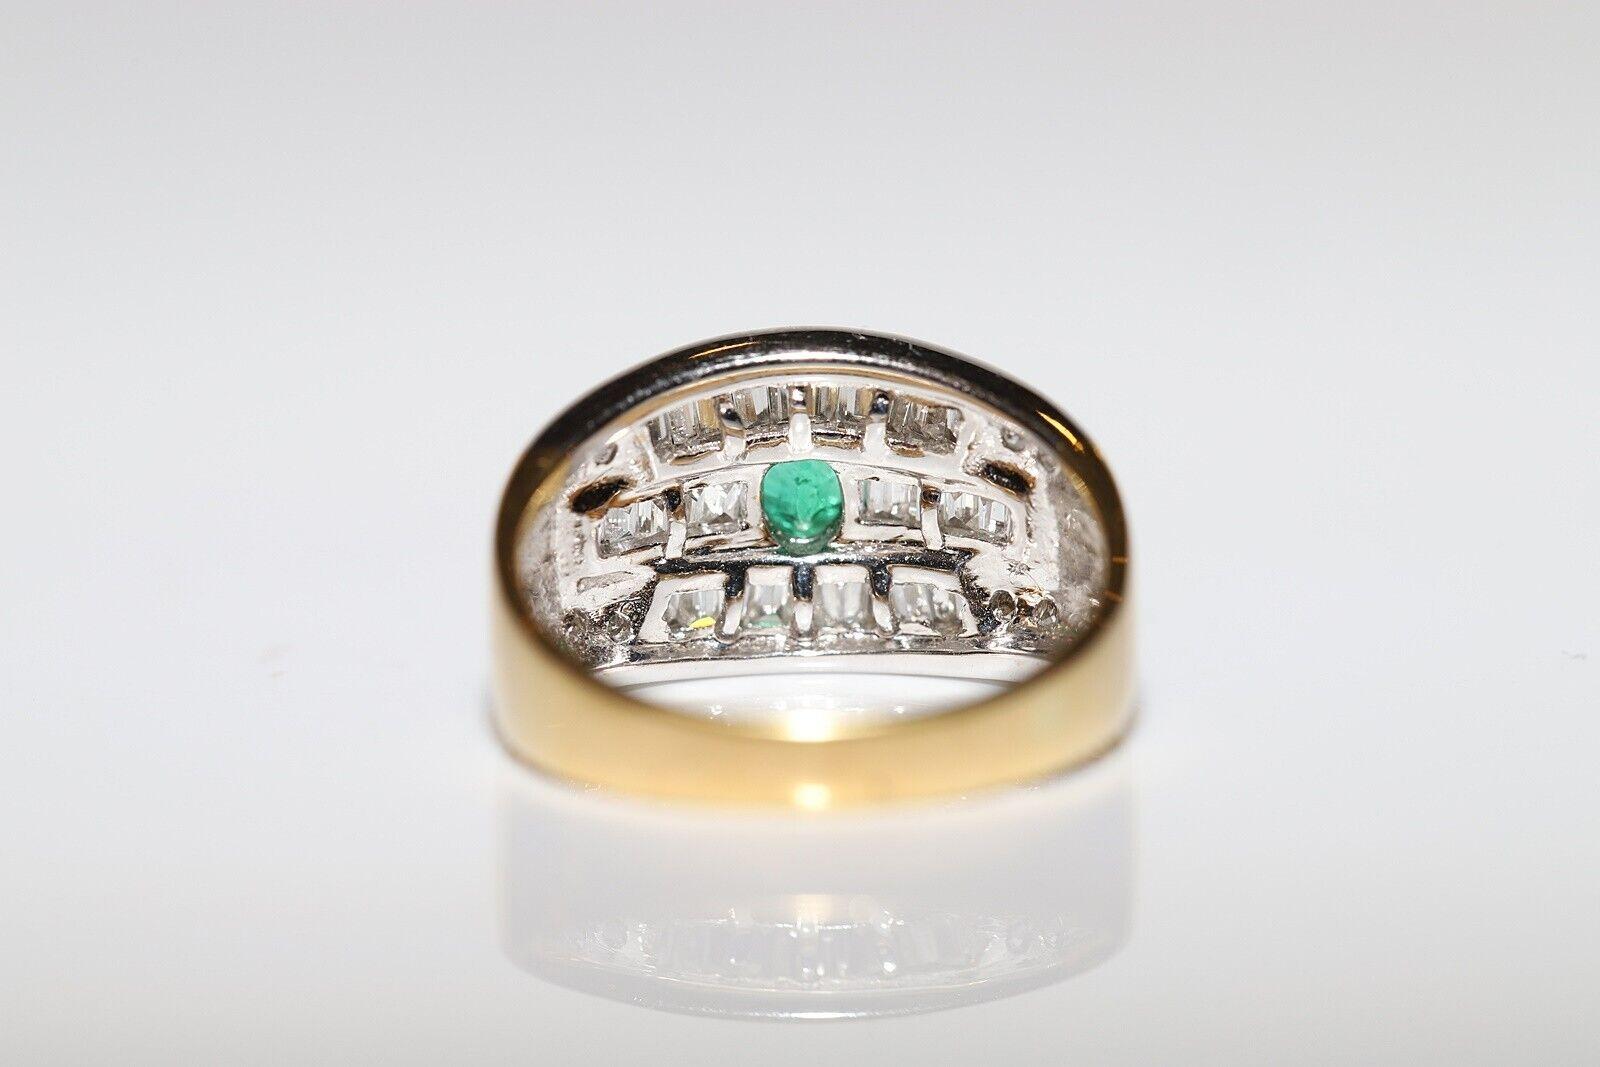 Retro Vintage Circa 1980s 18k Gold Natural Baguette Cut Diamond And Emerald Ring For Sale